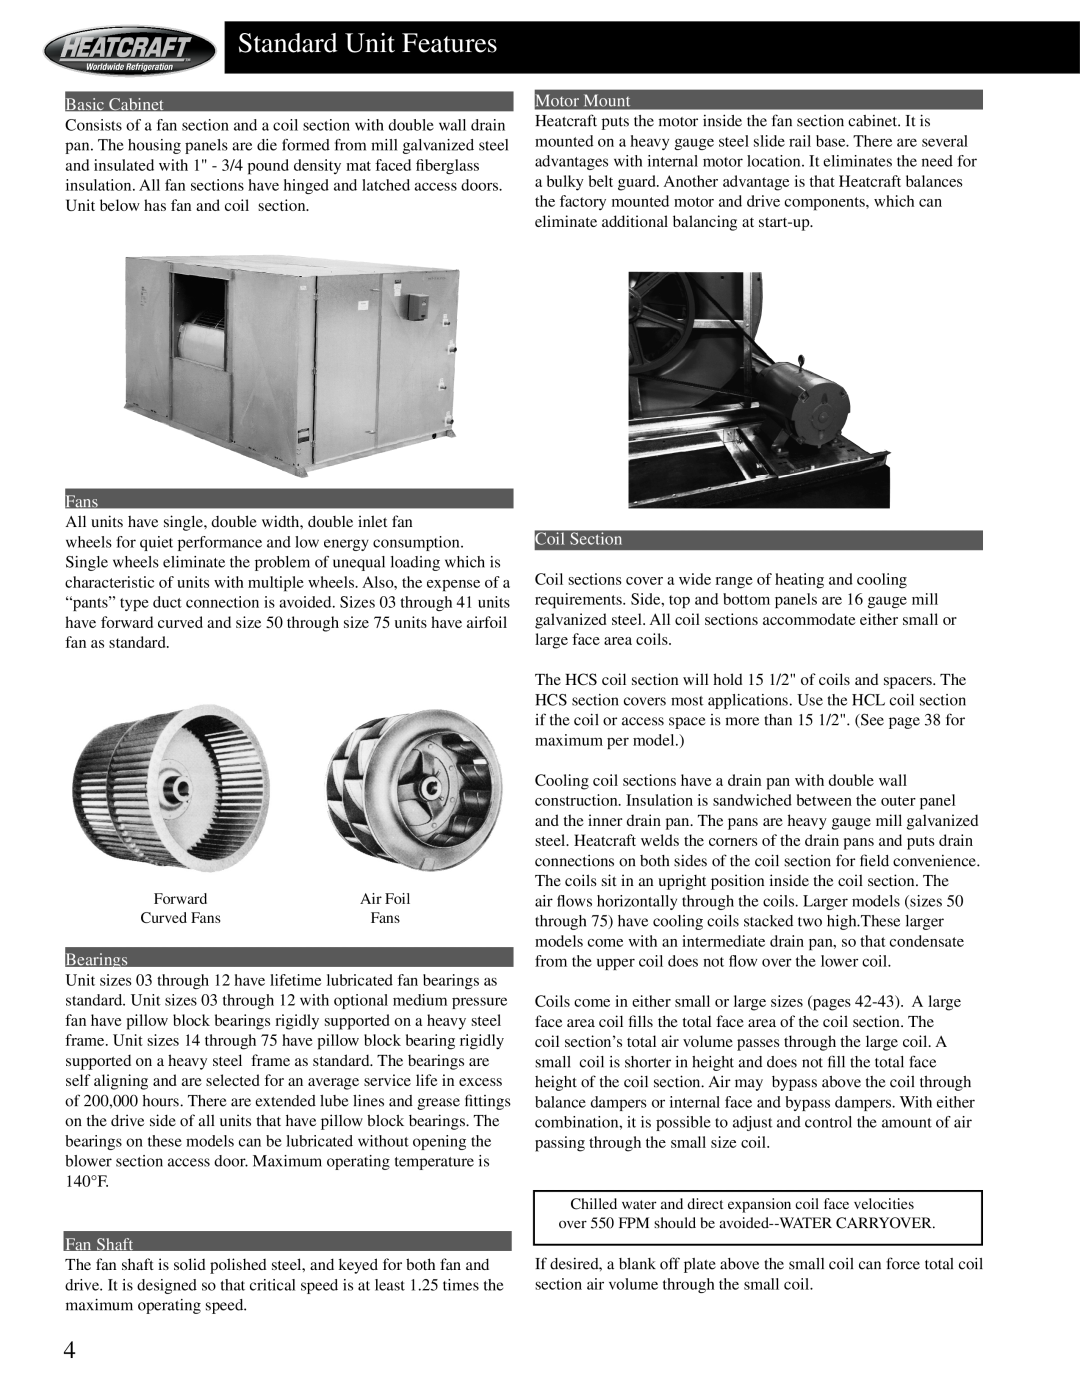 Heatcraft Refrigeration Products HCS Standard Unit Features, Basic Cabinet, Motor Mount, Fans, Coil Section, Bearings 